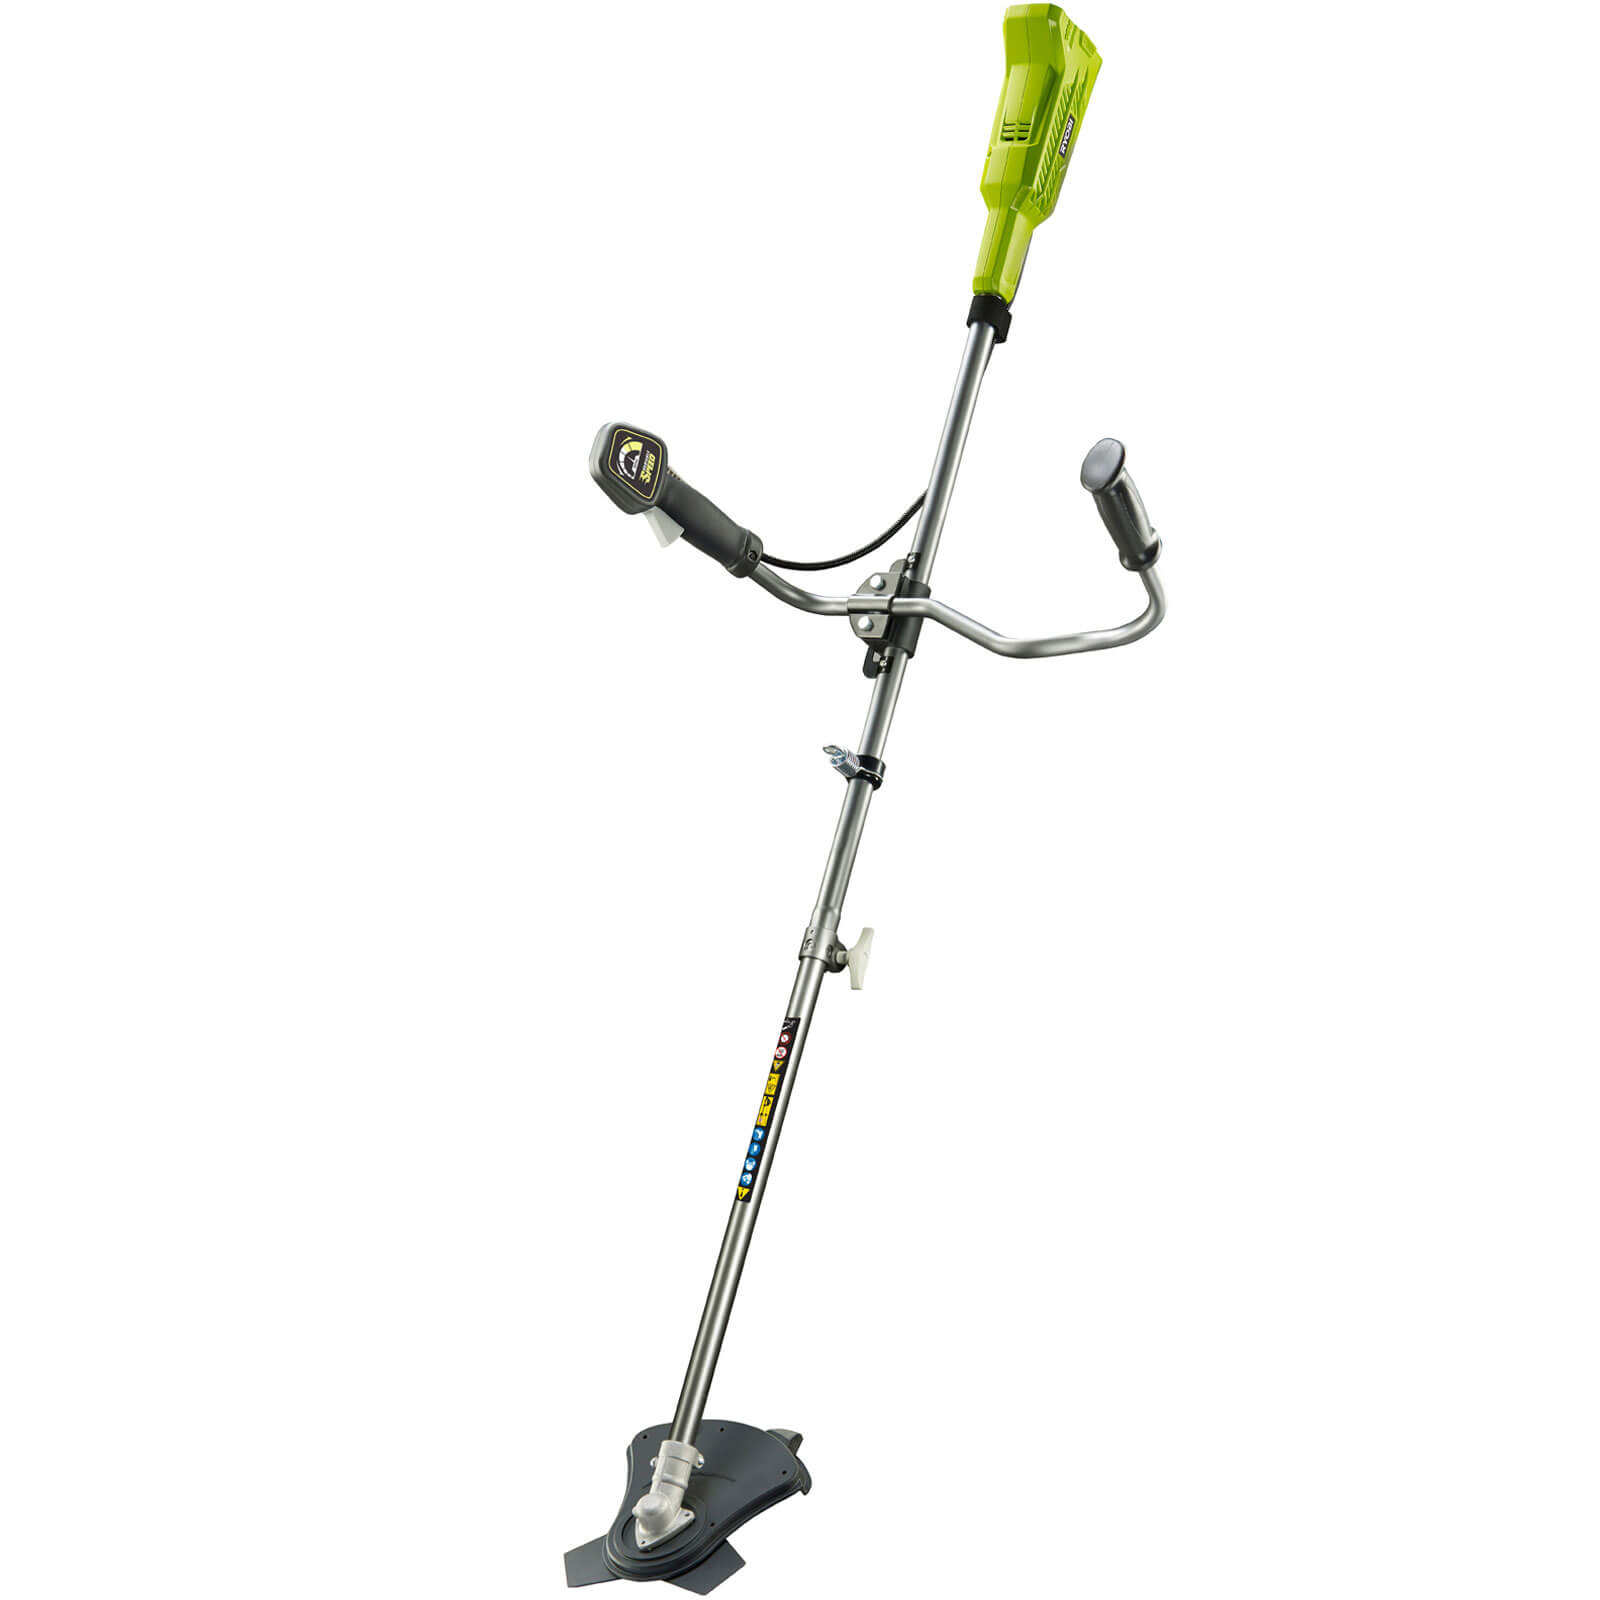 echo hc 150 hedge trimmer for sale